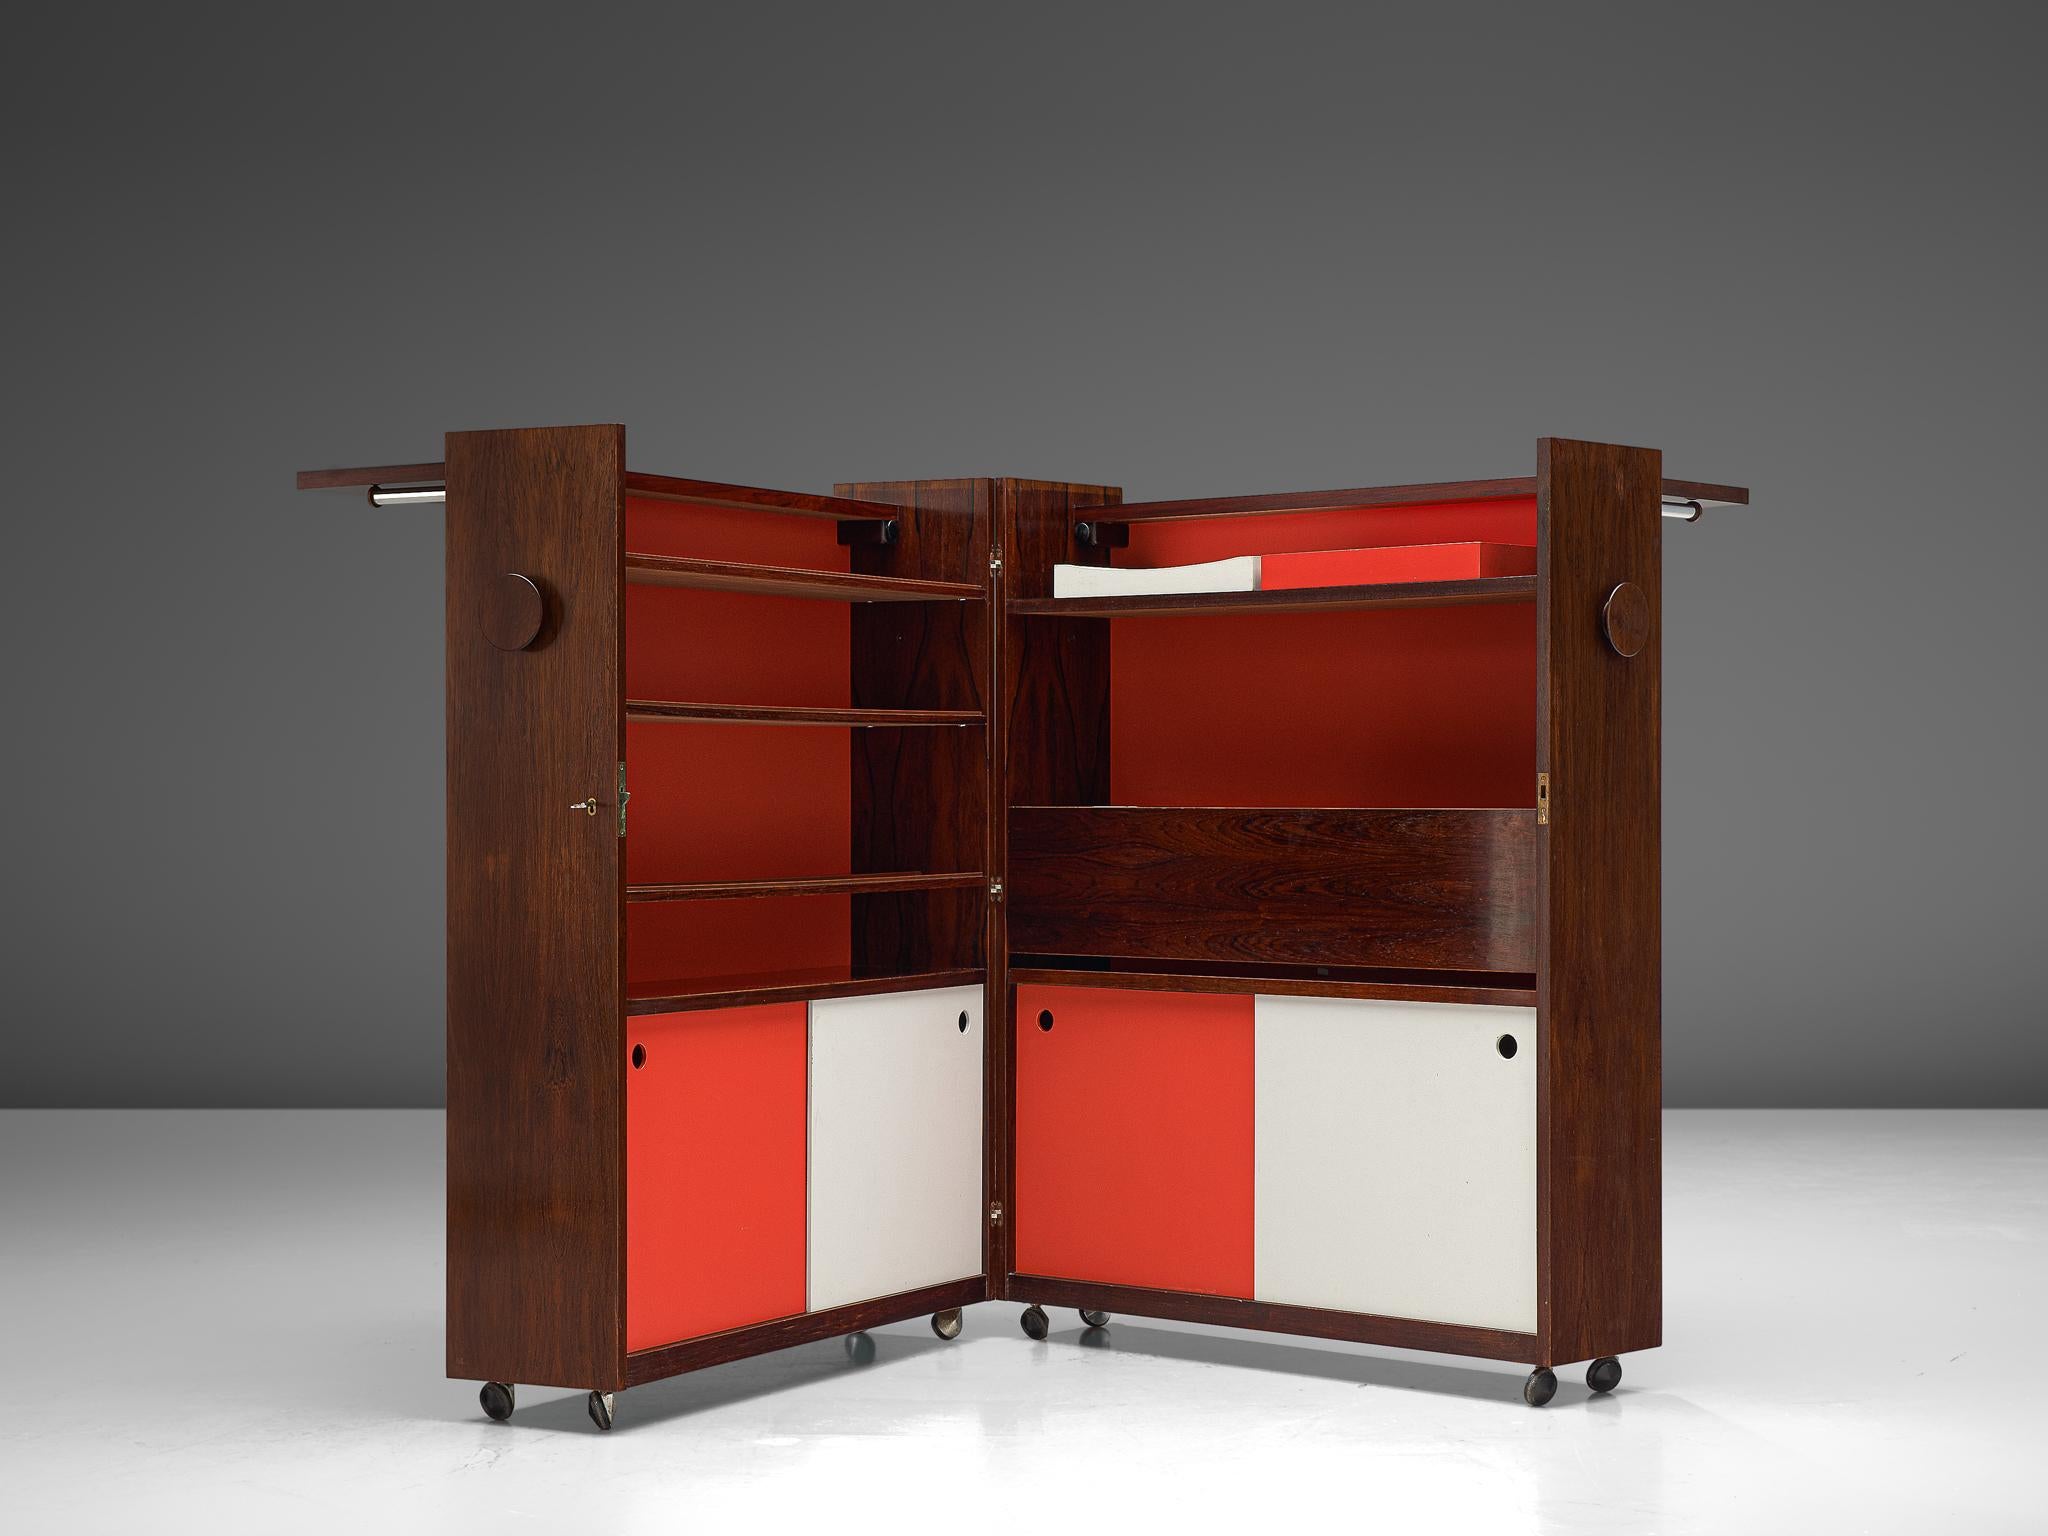 Erik Buch, bar cabinet, rosewood and plywood, Denmark, 1960s

Scandinavian Modern foldable dry bar designed by Eric Buch. The bar features red and white elements on the inside whereas the outside of the bar is made of rosewood featuring a wonderful